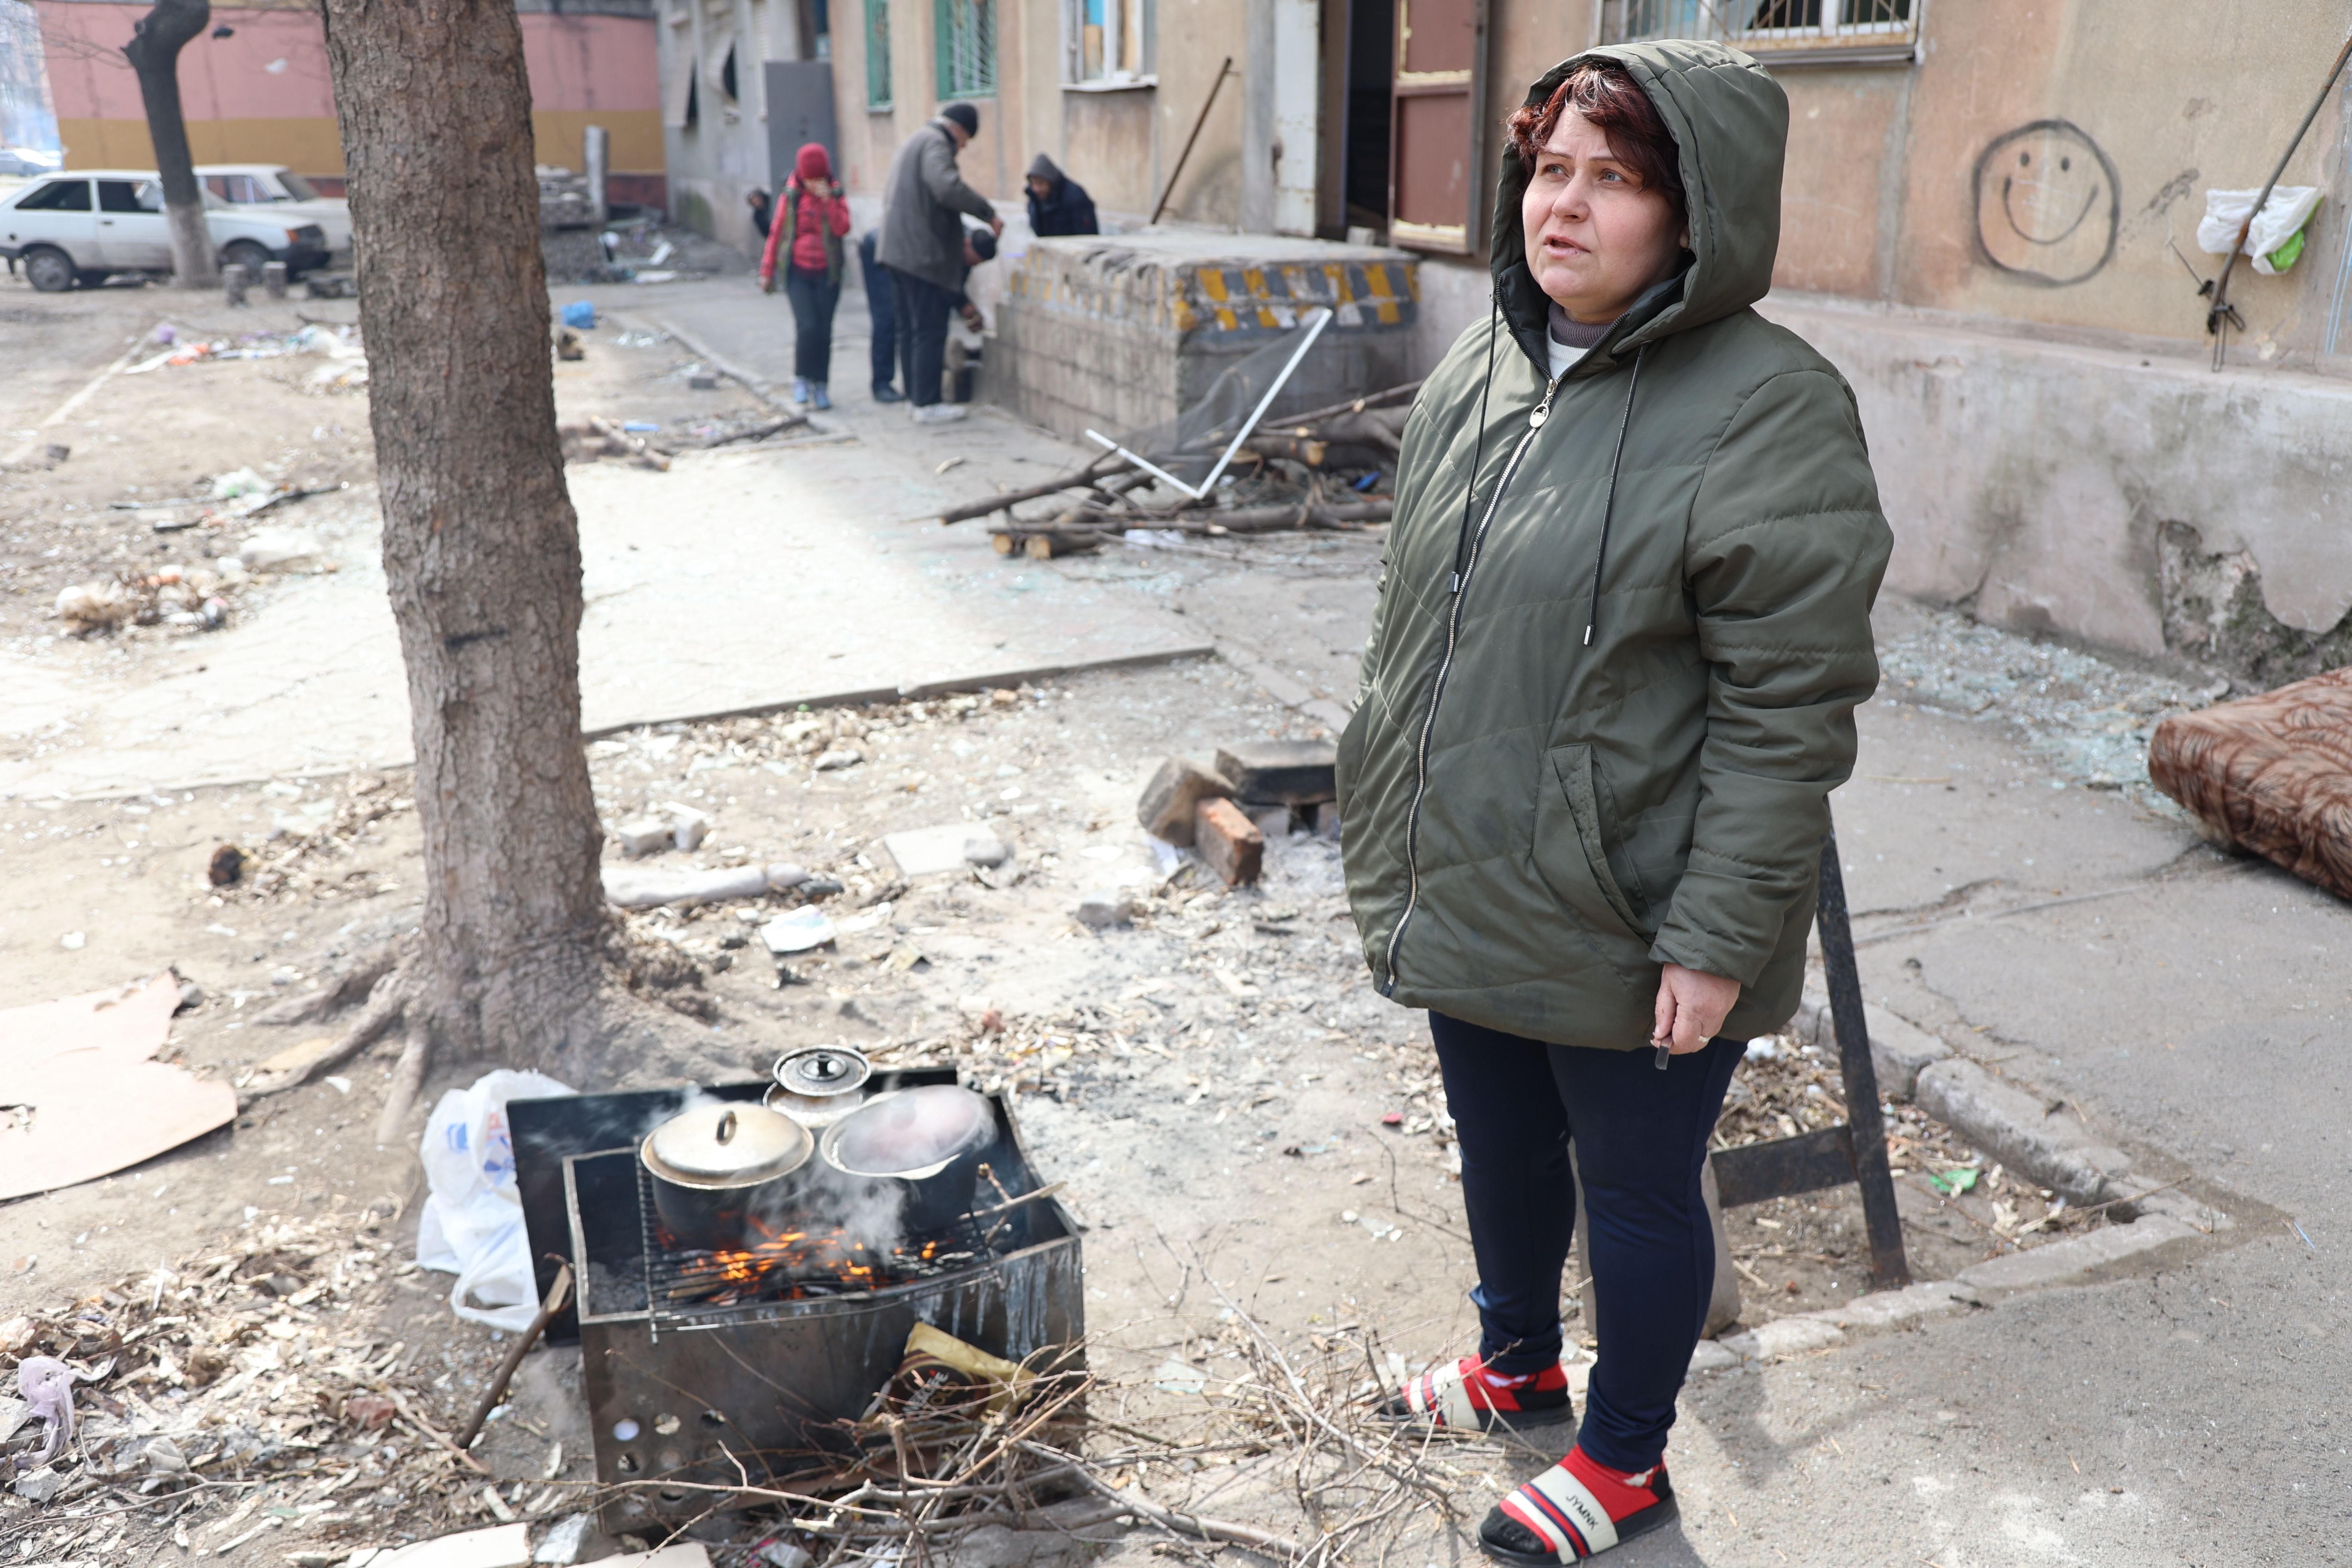 Civilians cook meal amid rubbles of apartment damaged by shelling in the Ukrainian city of Mariupol under the control of Russian military and pro-Russian separatists, on March 29.